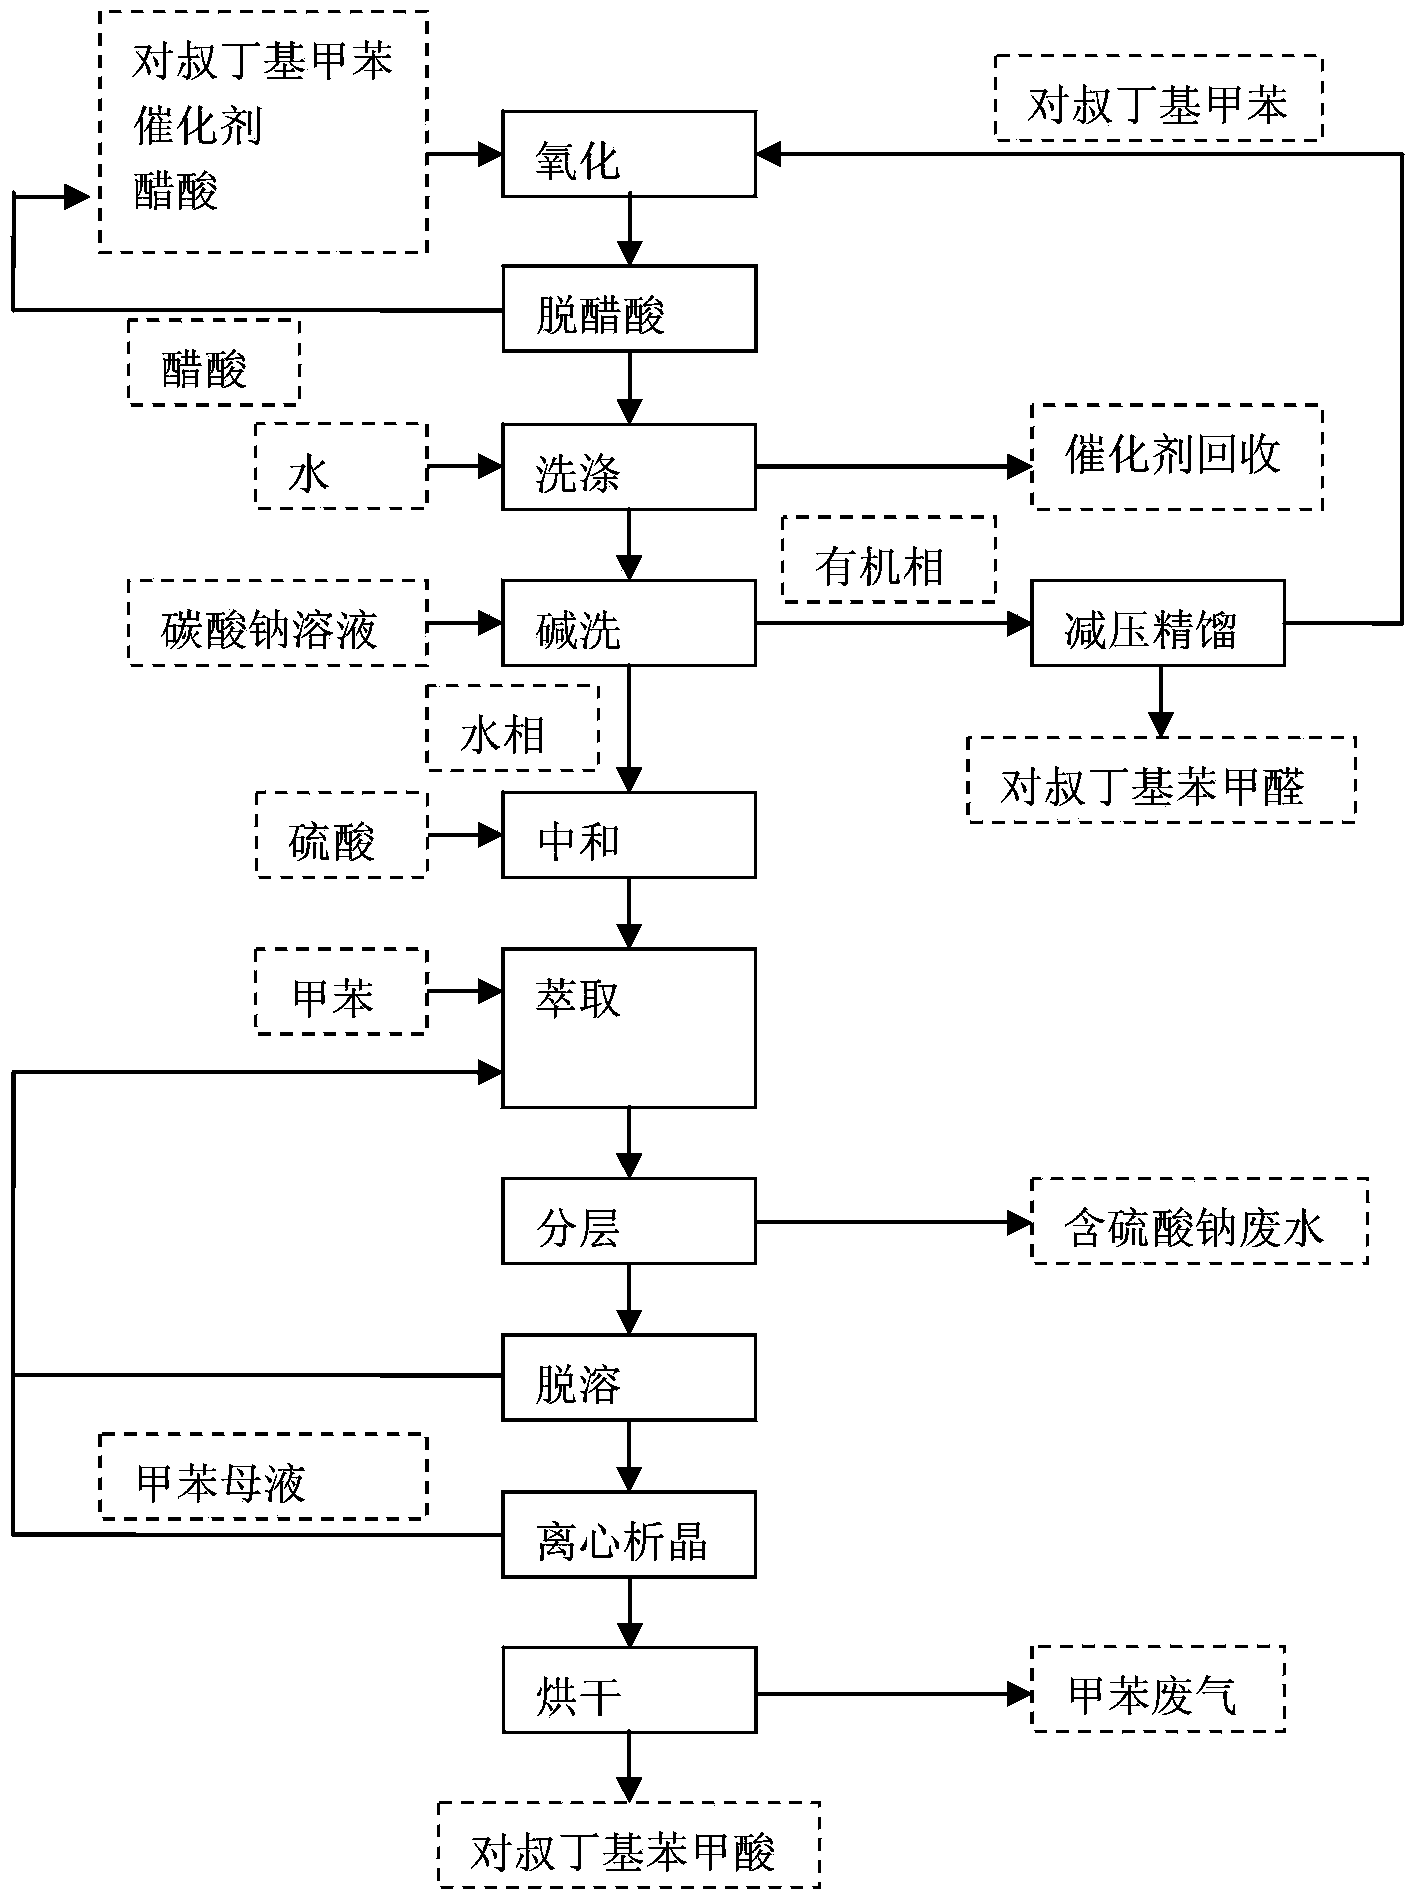 Separation process of substituted benzaldehyde co-produced products